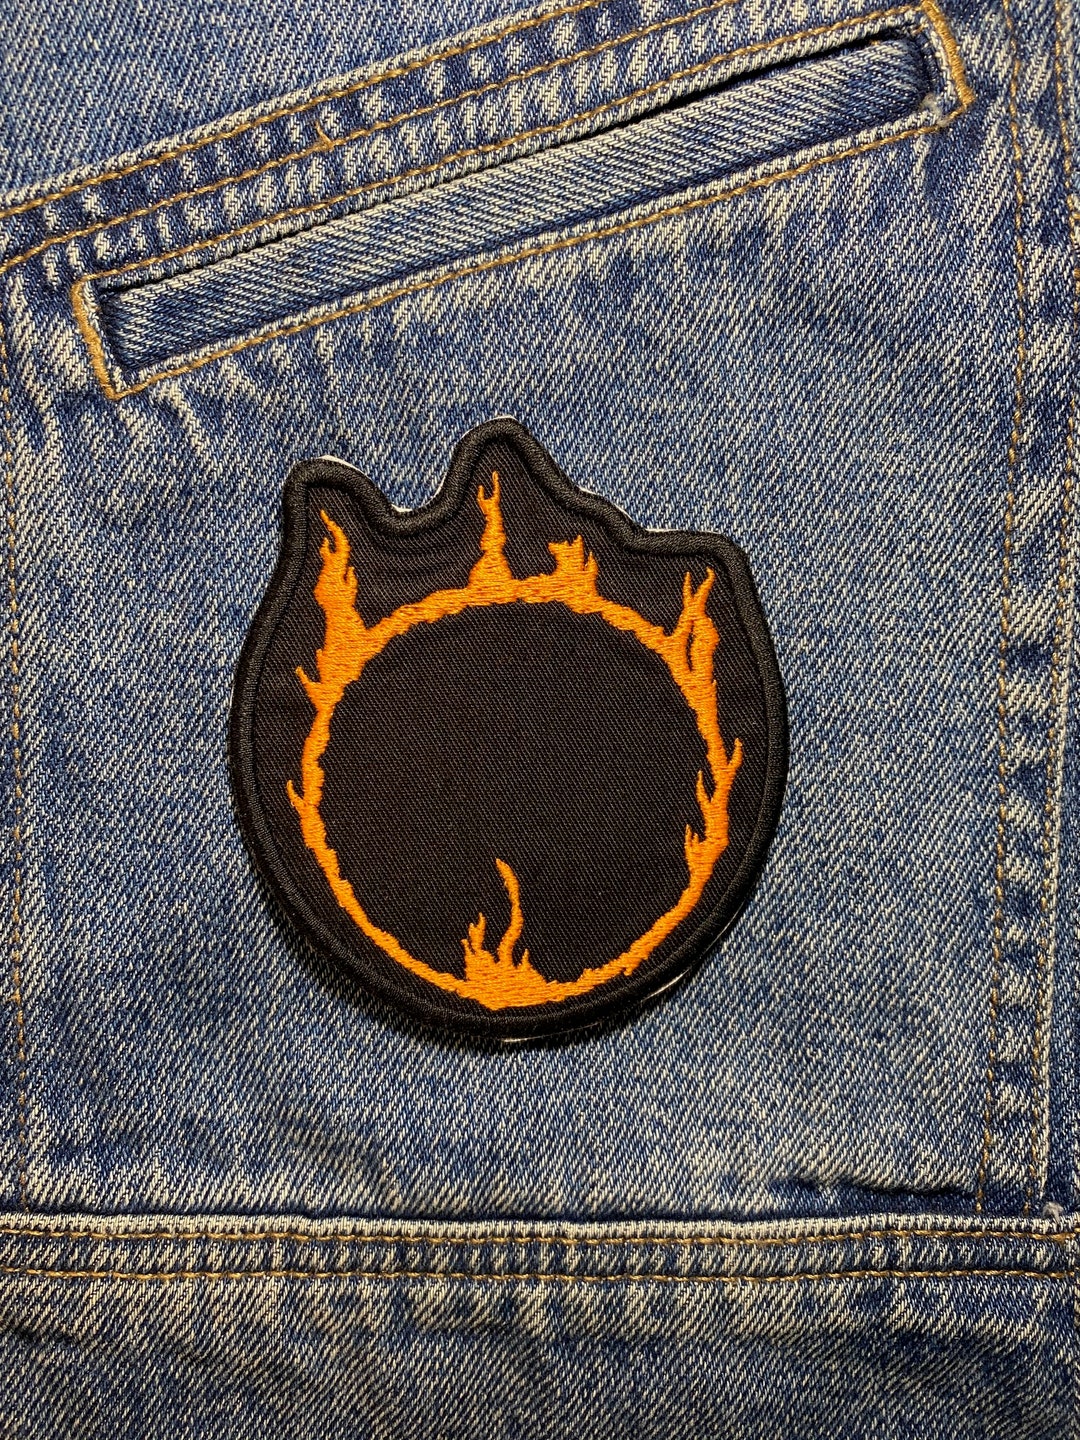 Hunter's Mark Embroidered Patch. Horror Movie/video Game Inspired Patches.  Iron on Backing. 